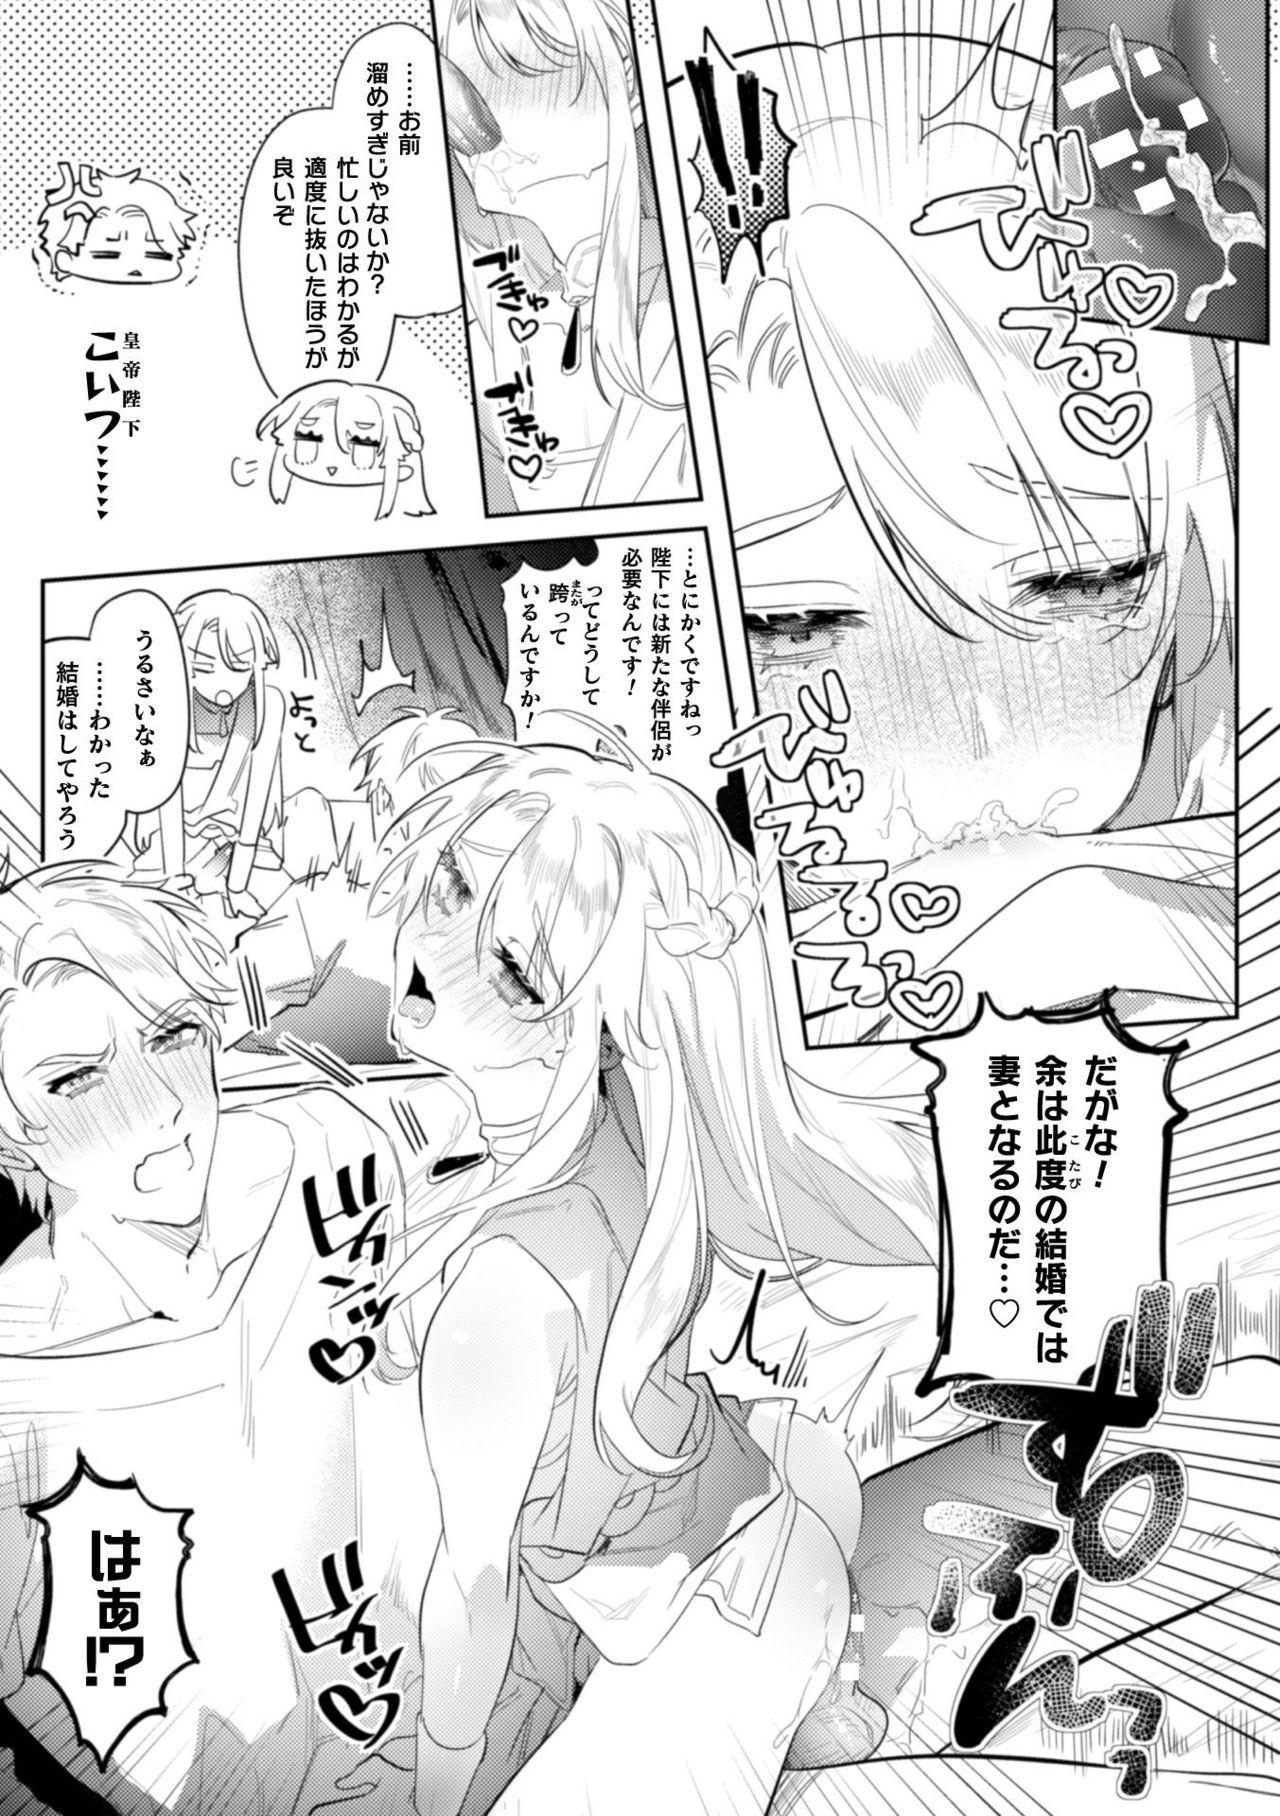 Stretching 淫蕩宮廷史 ～淫帝と呼ばれた美少年～ 第2話 Doggie Style Porn - Page 6